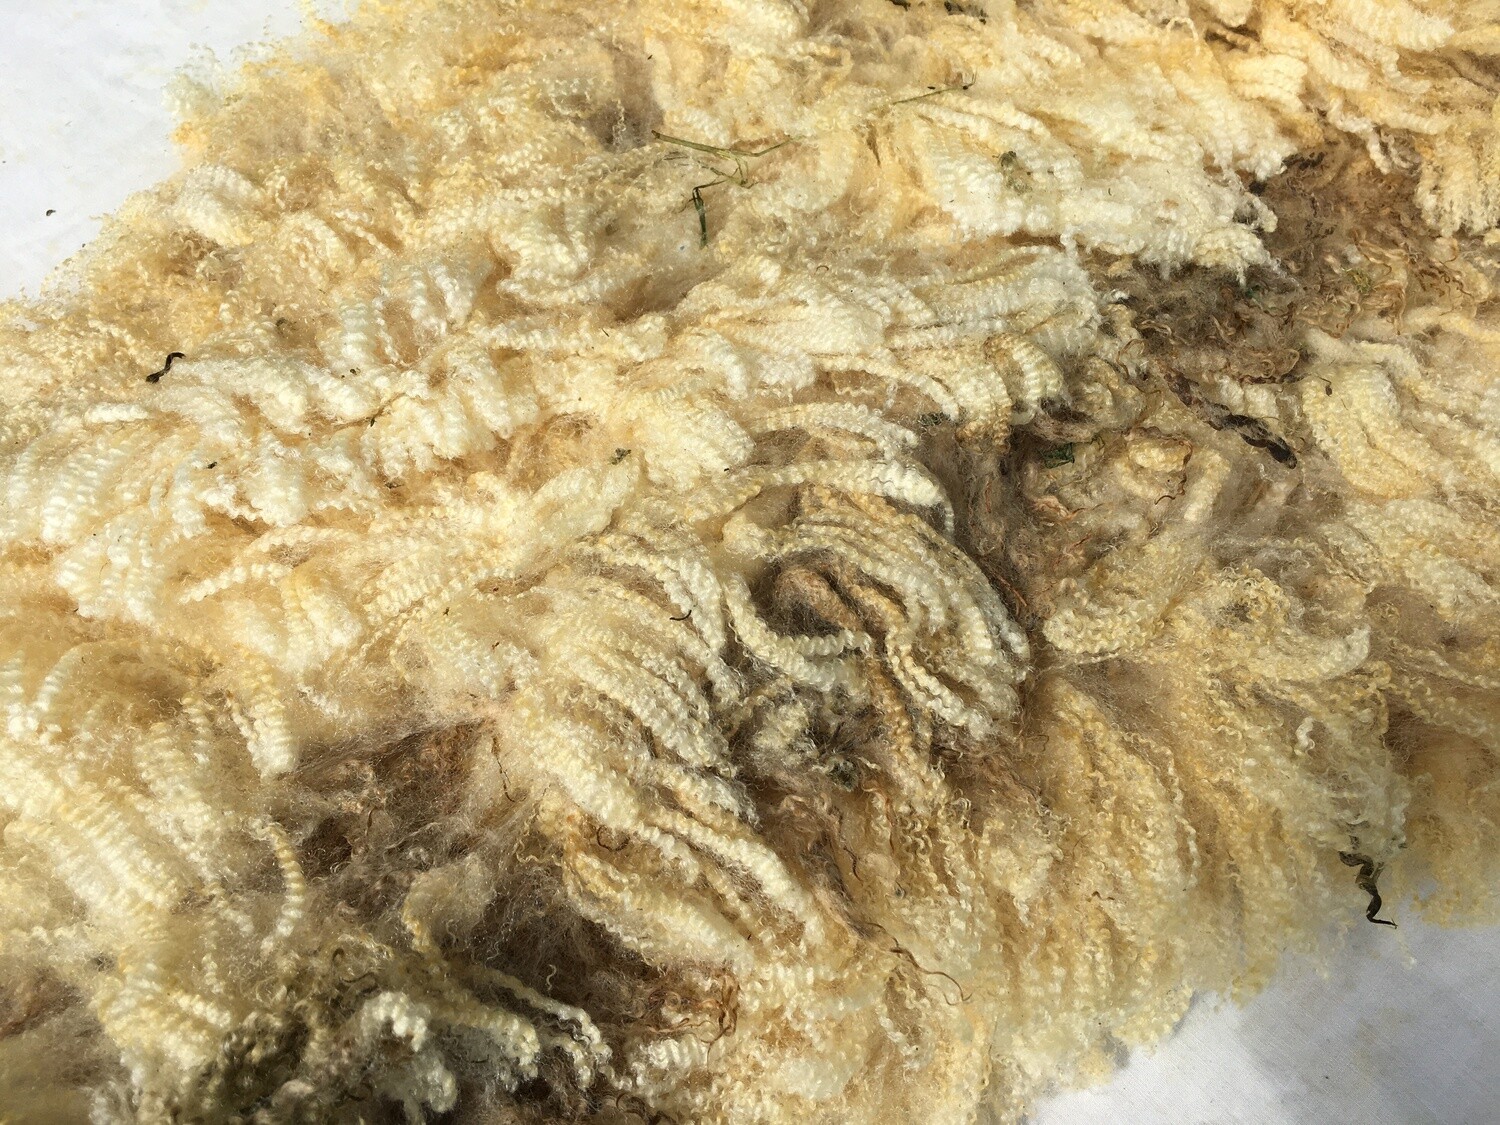 Bluefaced leicester shearling ewe fleece 'Nellie'